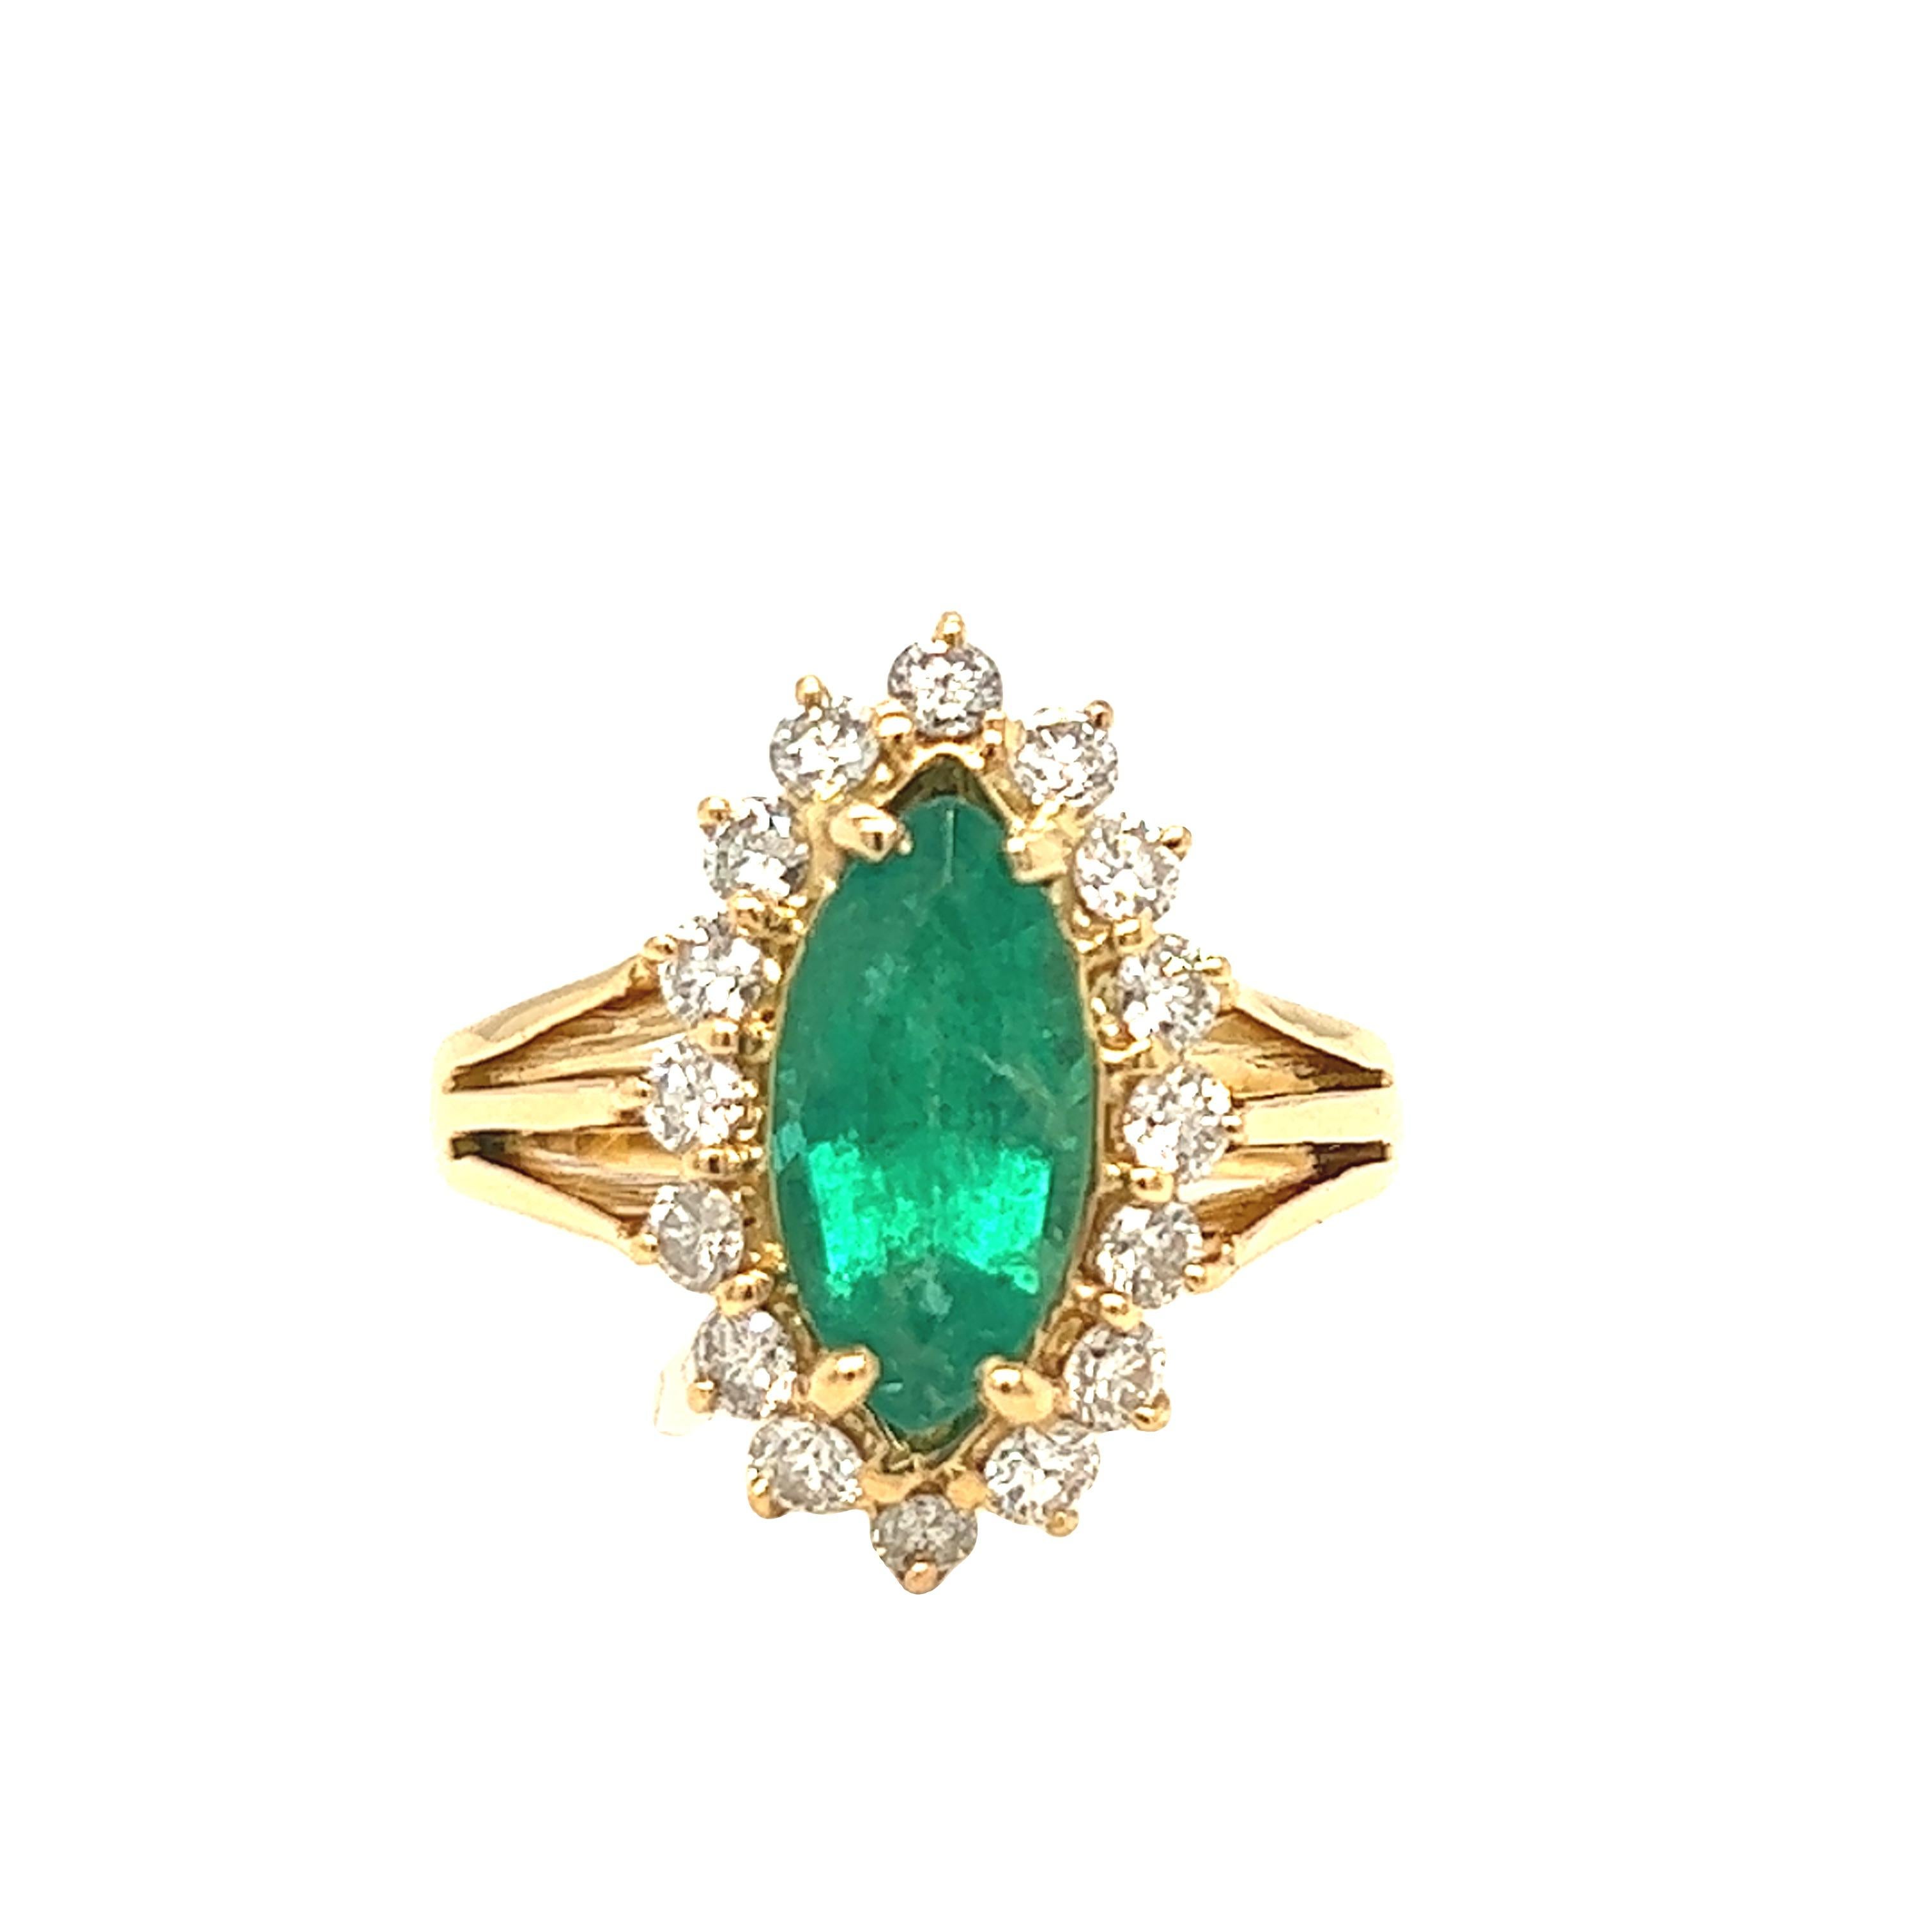 As a perfect cocktail ring or colored stone engagement ring, this romantic ring is crafted in 18K yellow gold with a split shank and prongs holding a vibrant marquise emerald weighing approximately 2.10 carats. The center emerald is enhanced by 16